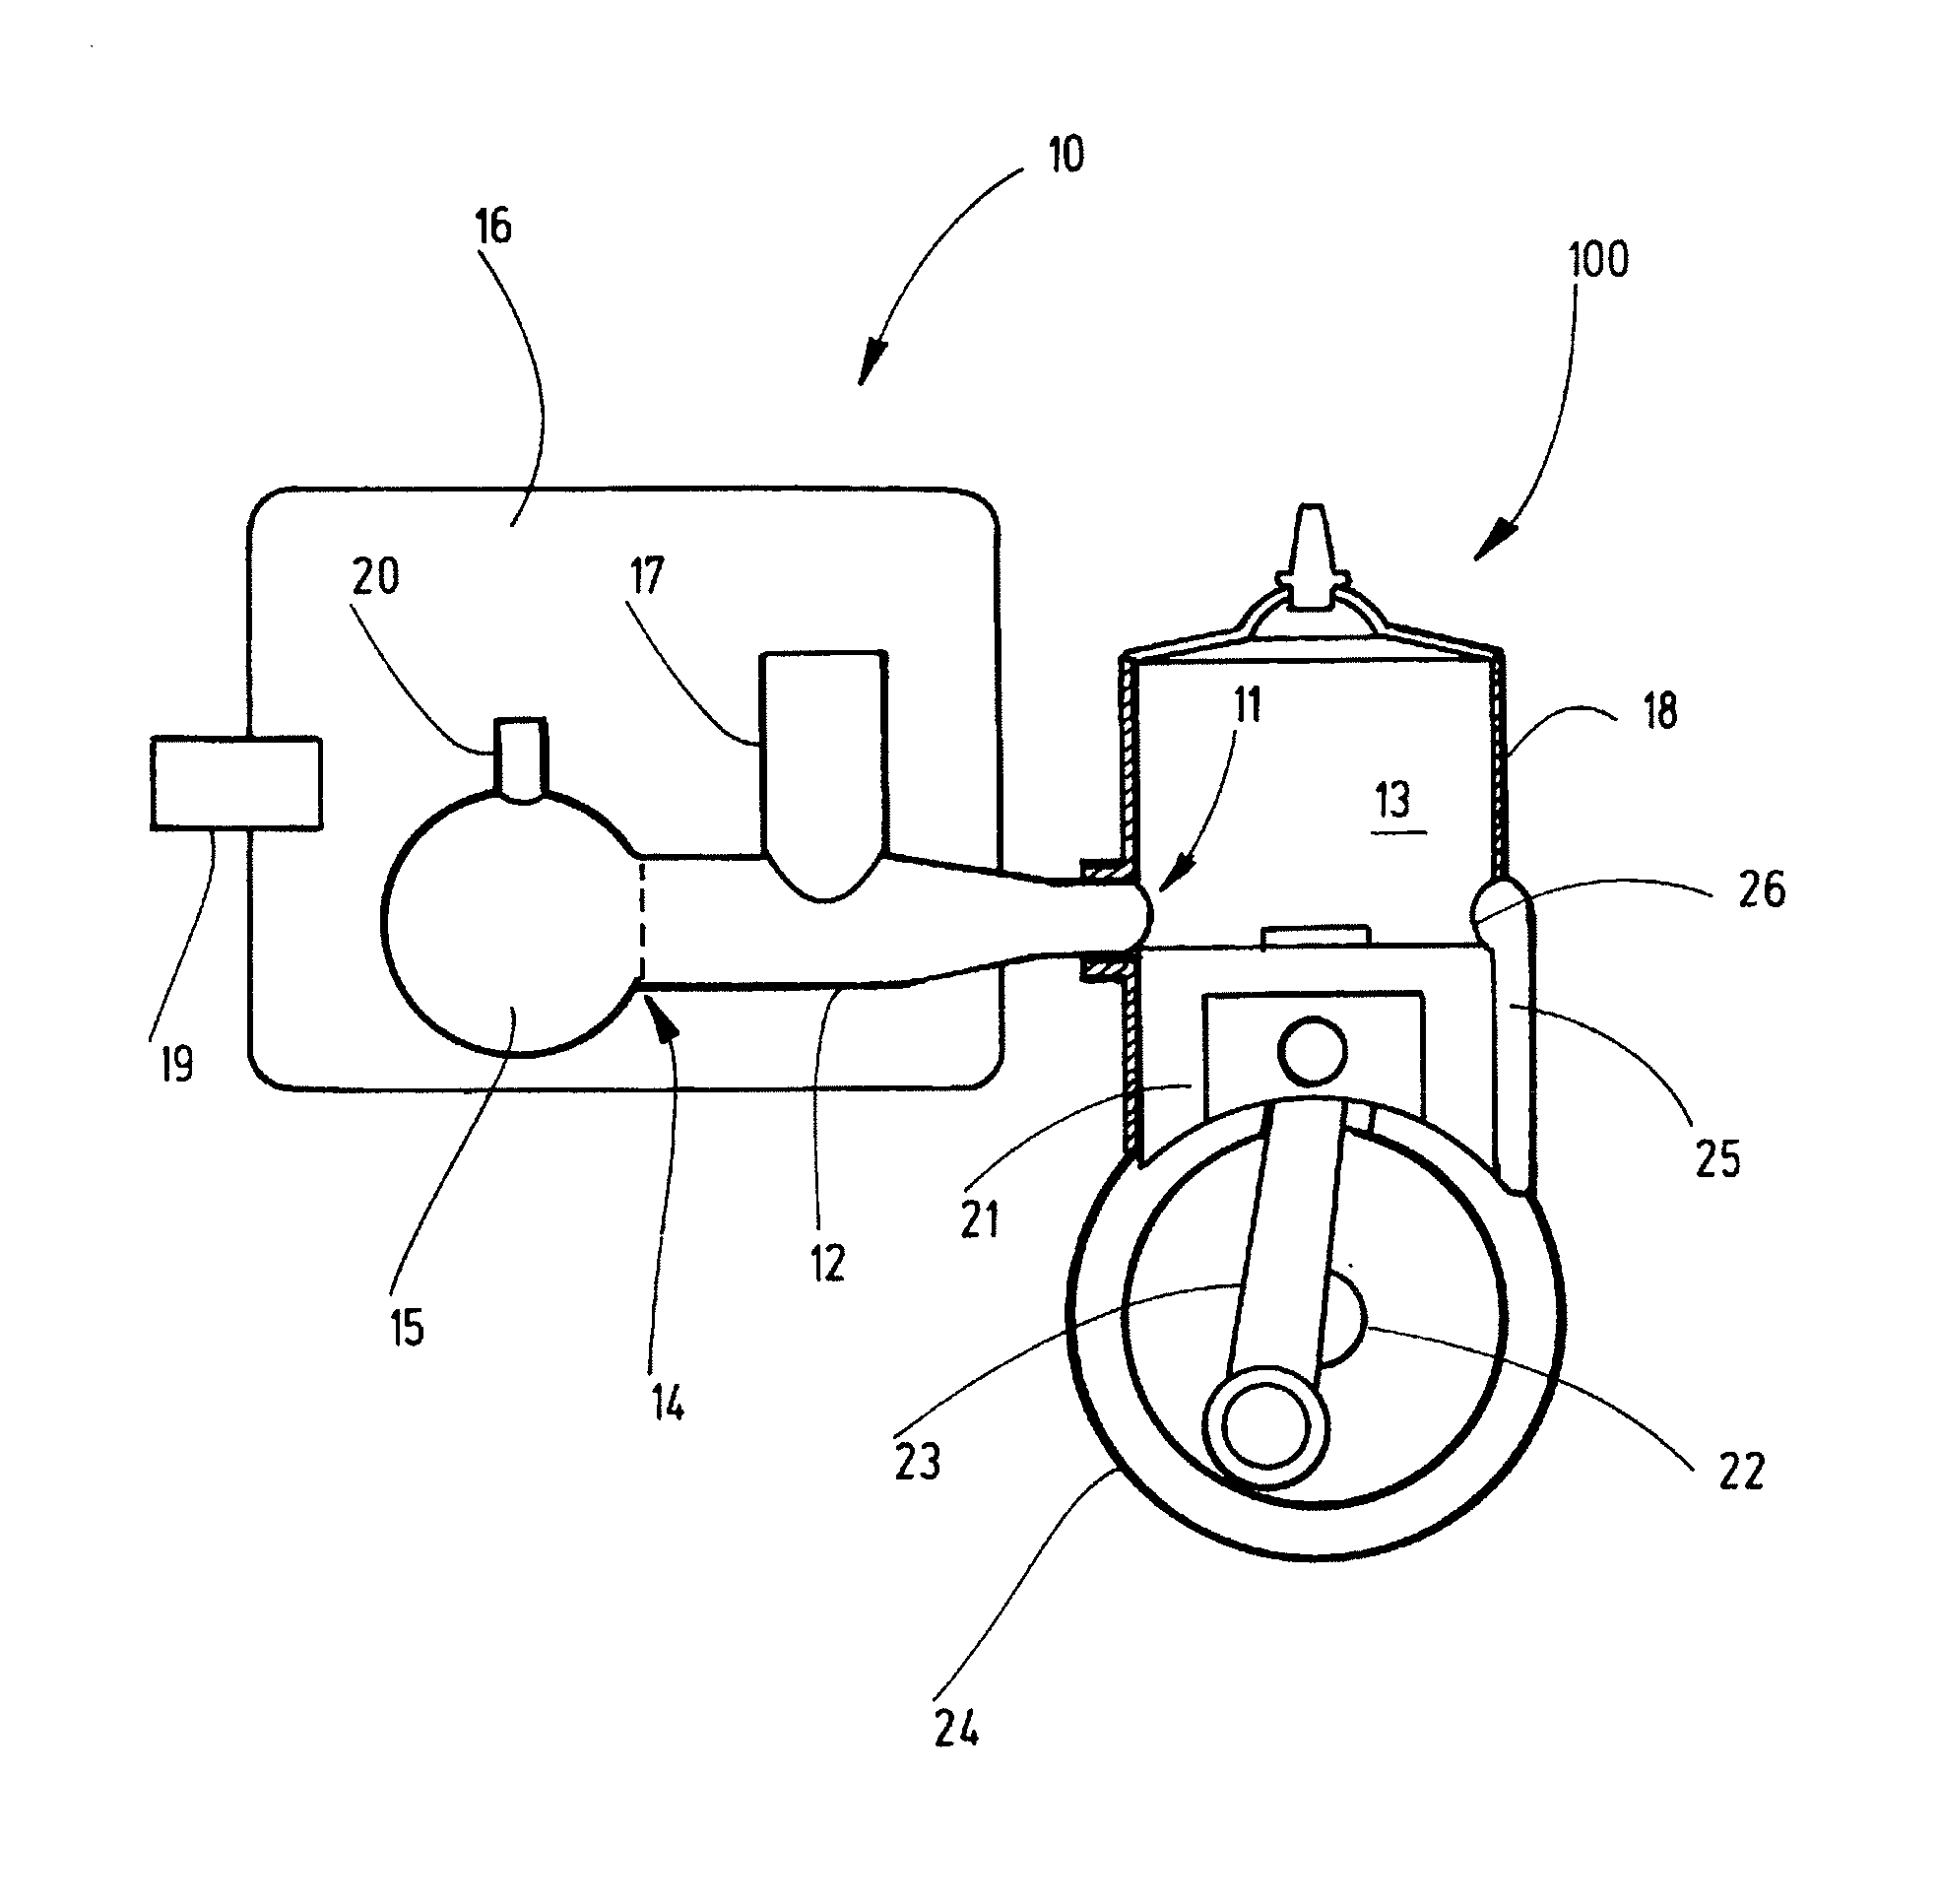 Two-stroke engine comprising a muffler